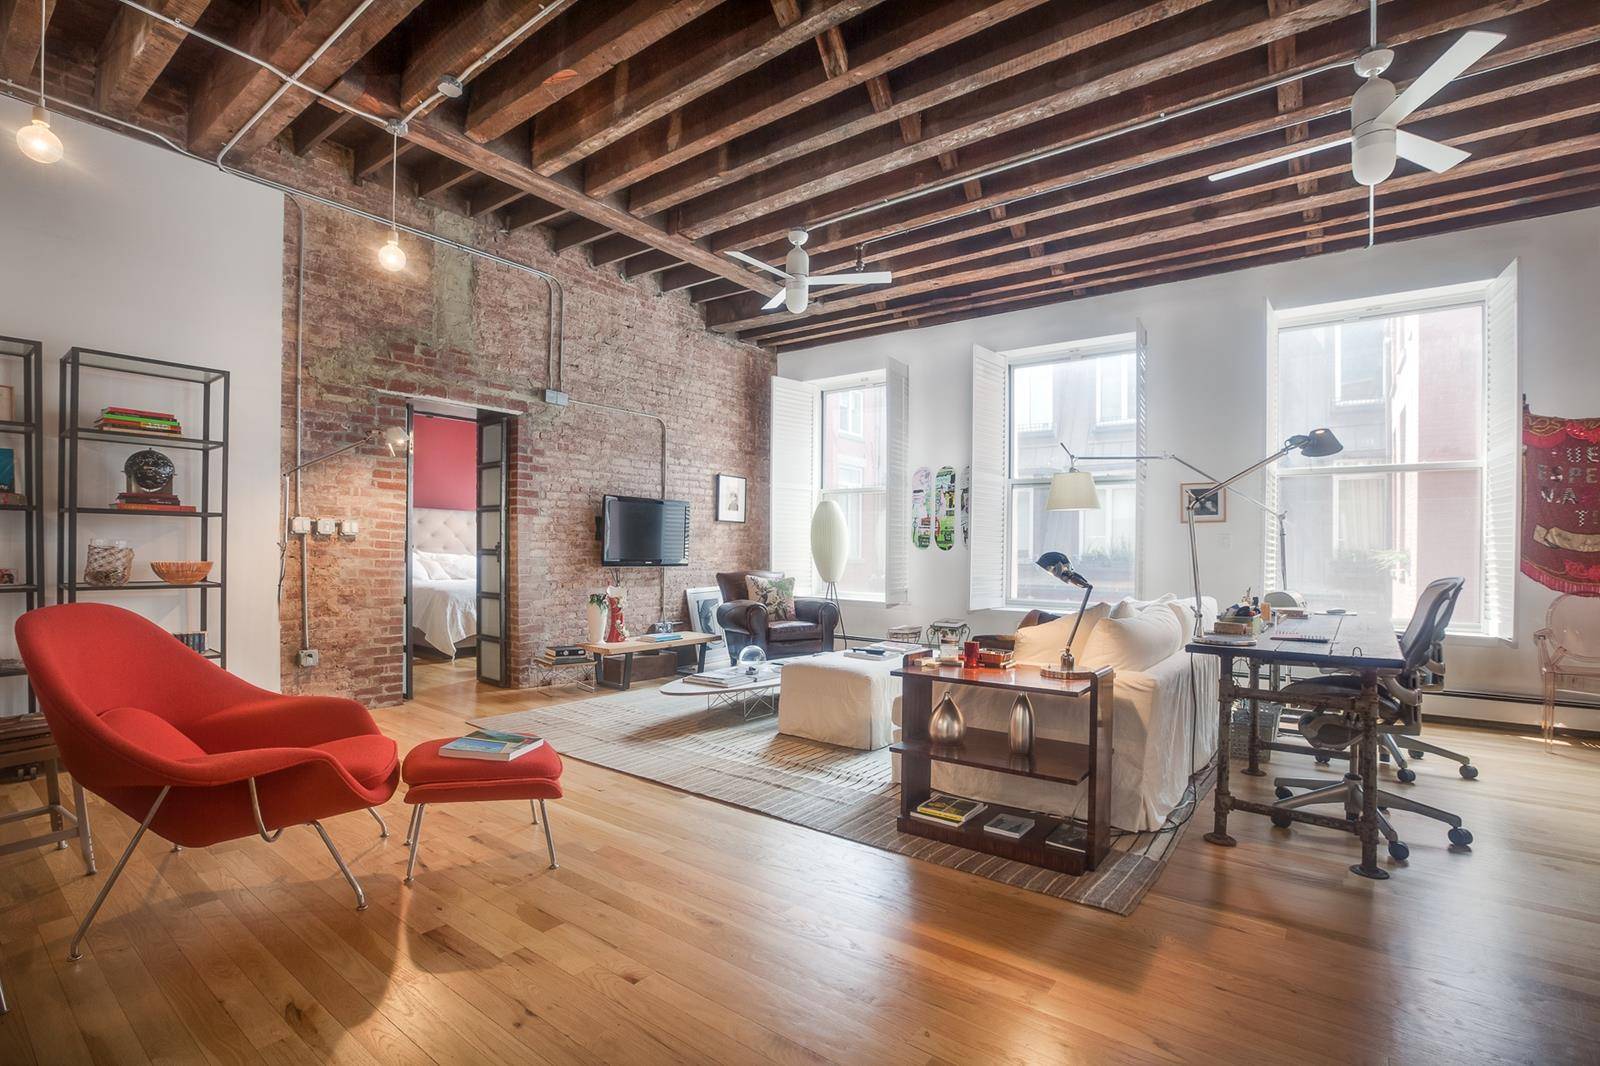 Introducing an authentic cast iron Soho loft with 13 ft.